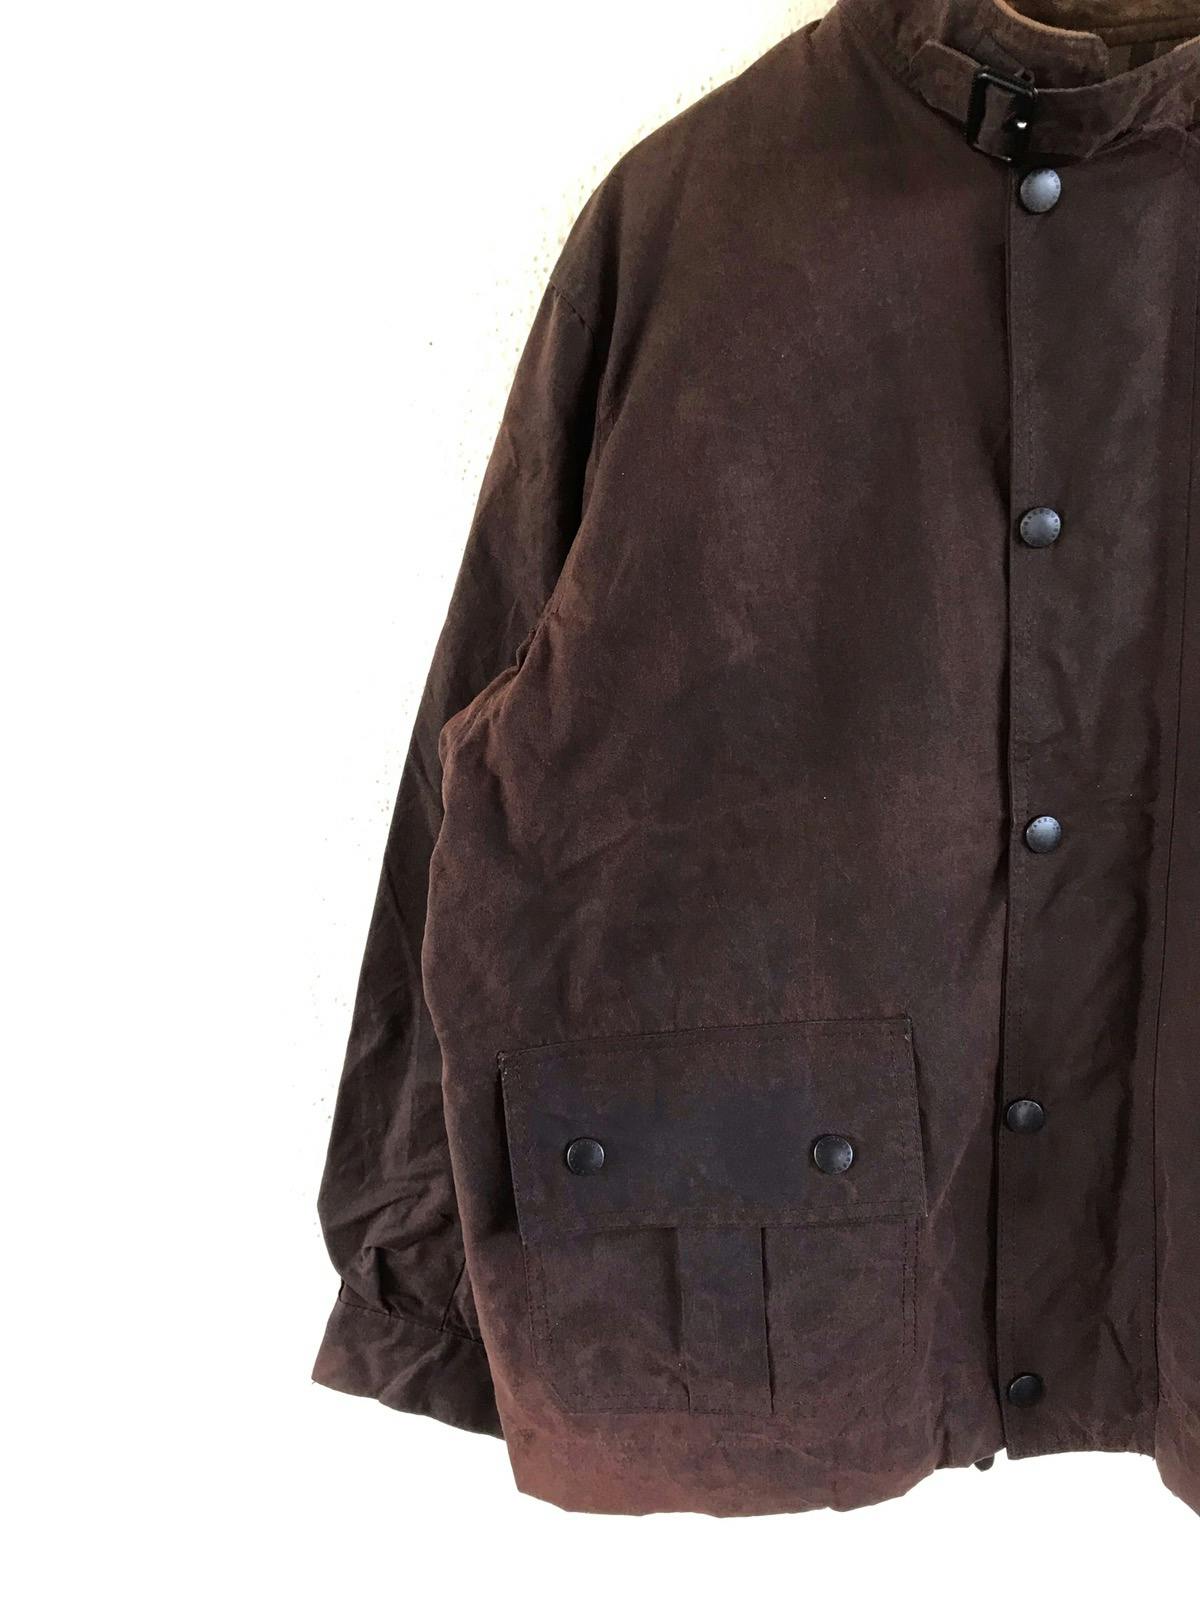 Barbour Wax Jacket Made in England - 5